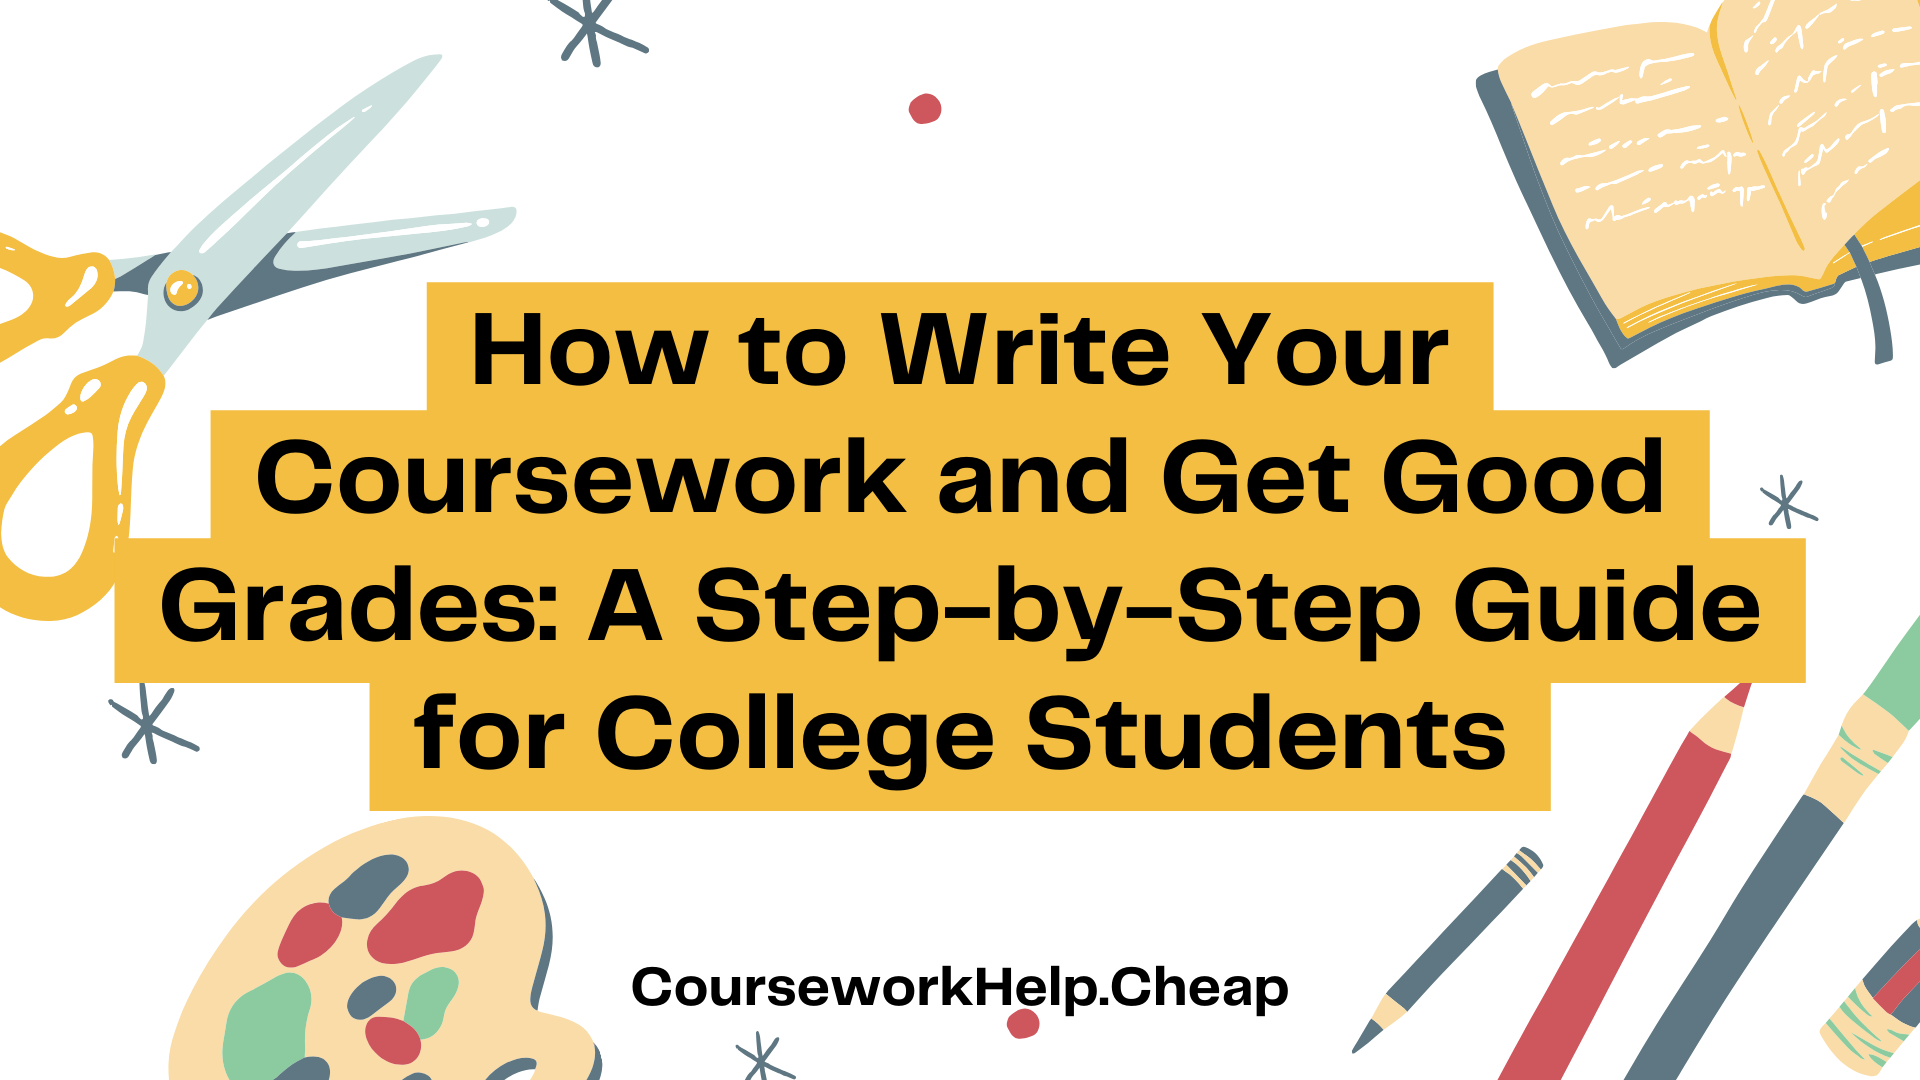 How to Write Your Coursework and Get Good Grades: A Step-by-Step Guide for College Students